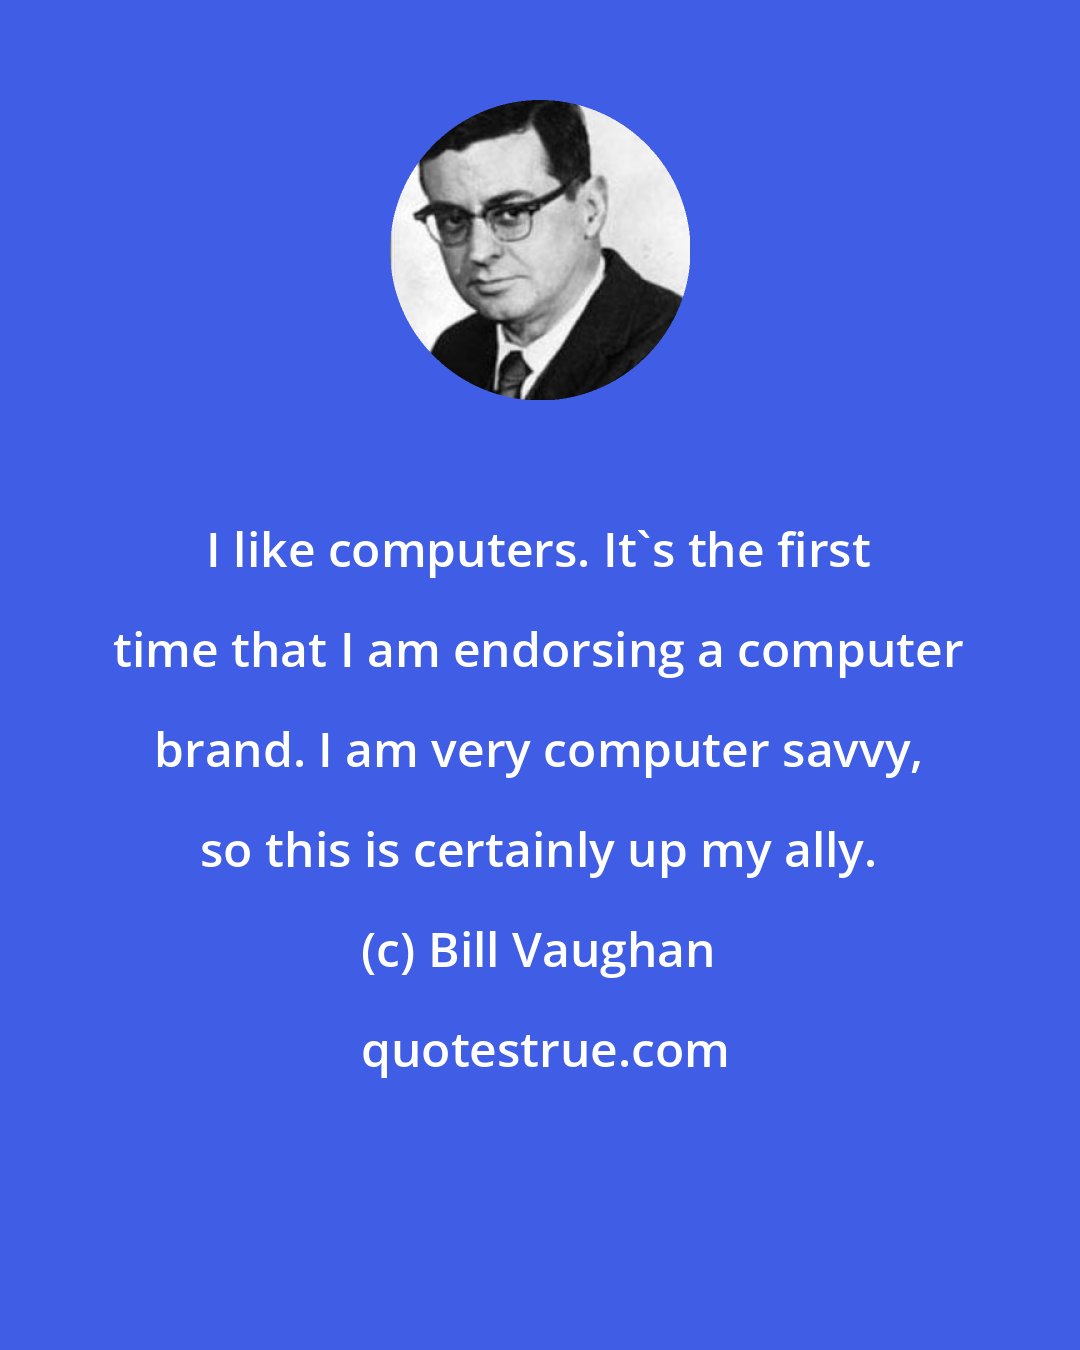 Bill Vaughan: I like computers. It's the first time that I am endorsing a computer brand. I am very computer savvy, so this is certainly up my ally.